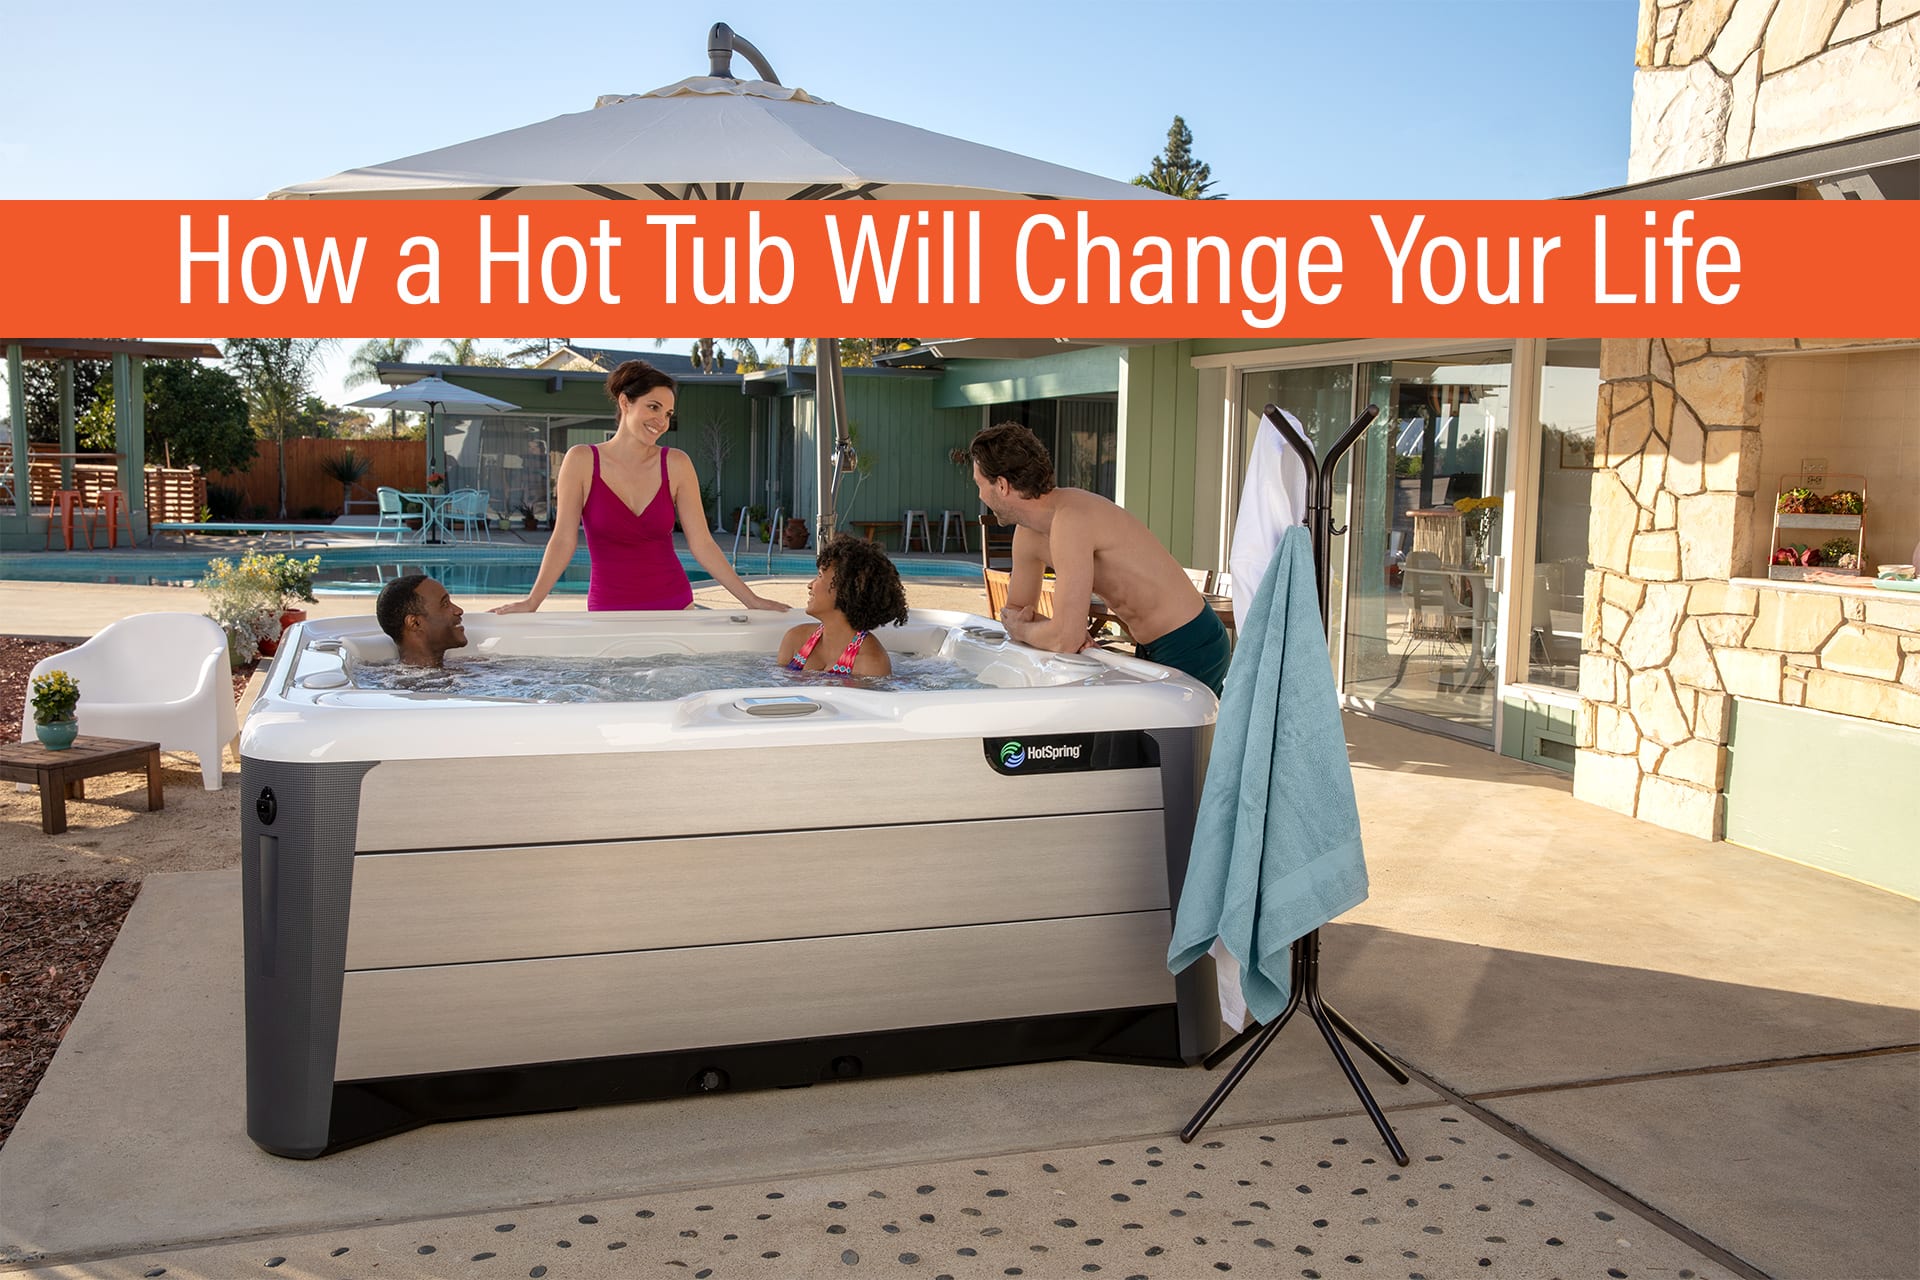 How A Hot Tub Will Change Your Life